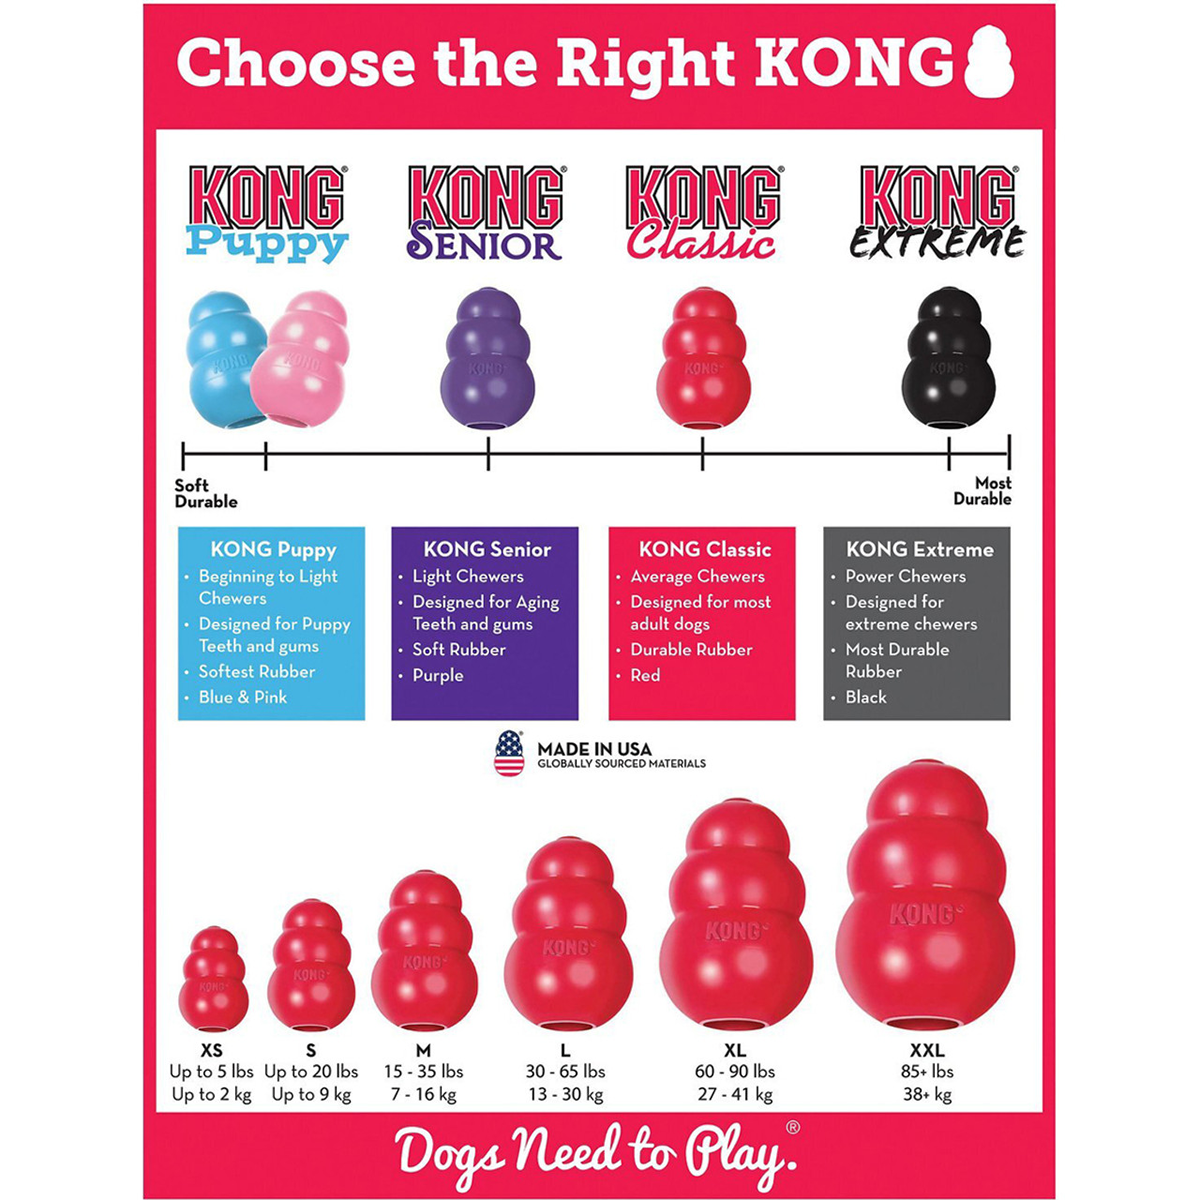 Kong Puppy Dog Toy